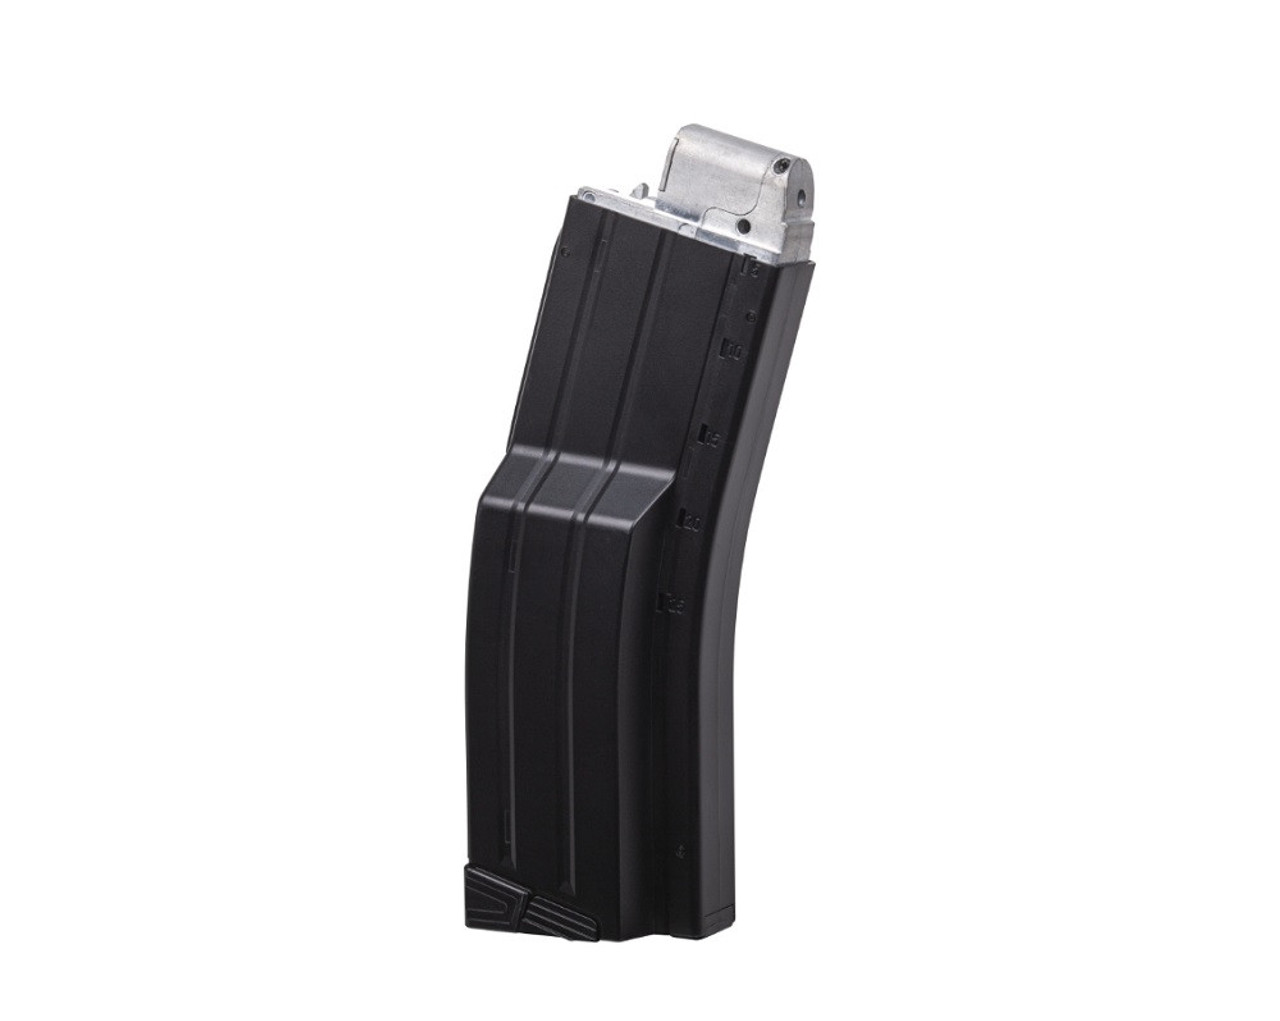 The Crosman QR-Mag will significantly cut down the time you spend reloading magazines! This quick reload (QR) magazine has a 300 rd reservoir with a built in speed loader that quickly refills the 25 spring fed rounds as soon as you run out! It is compatible with all DPMS SBR's, the Bushmaster MPW, and R1 Full Auto.

Crosman QR-Mag Features:
Spring fed magazine capacity 25 BB's
Reservoir capacity 300 BB's
Built-in speed loader reloads in seconds
Holds two CO2 cartridges
Compatible with DPMS models, Bushmaster MPW, and R1
Specs
ManufacturerCrosman
Condition New
Accessories Type MAGAZINES, CLIPS & RELOADERS
Warranty 1-year limited warranty
Weight 0.75
Caliber .177